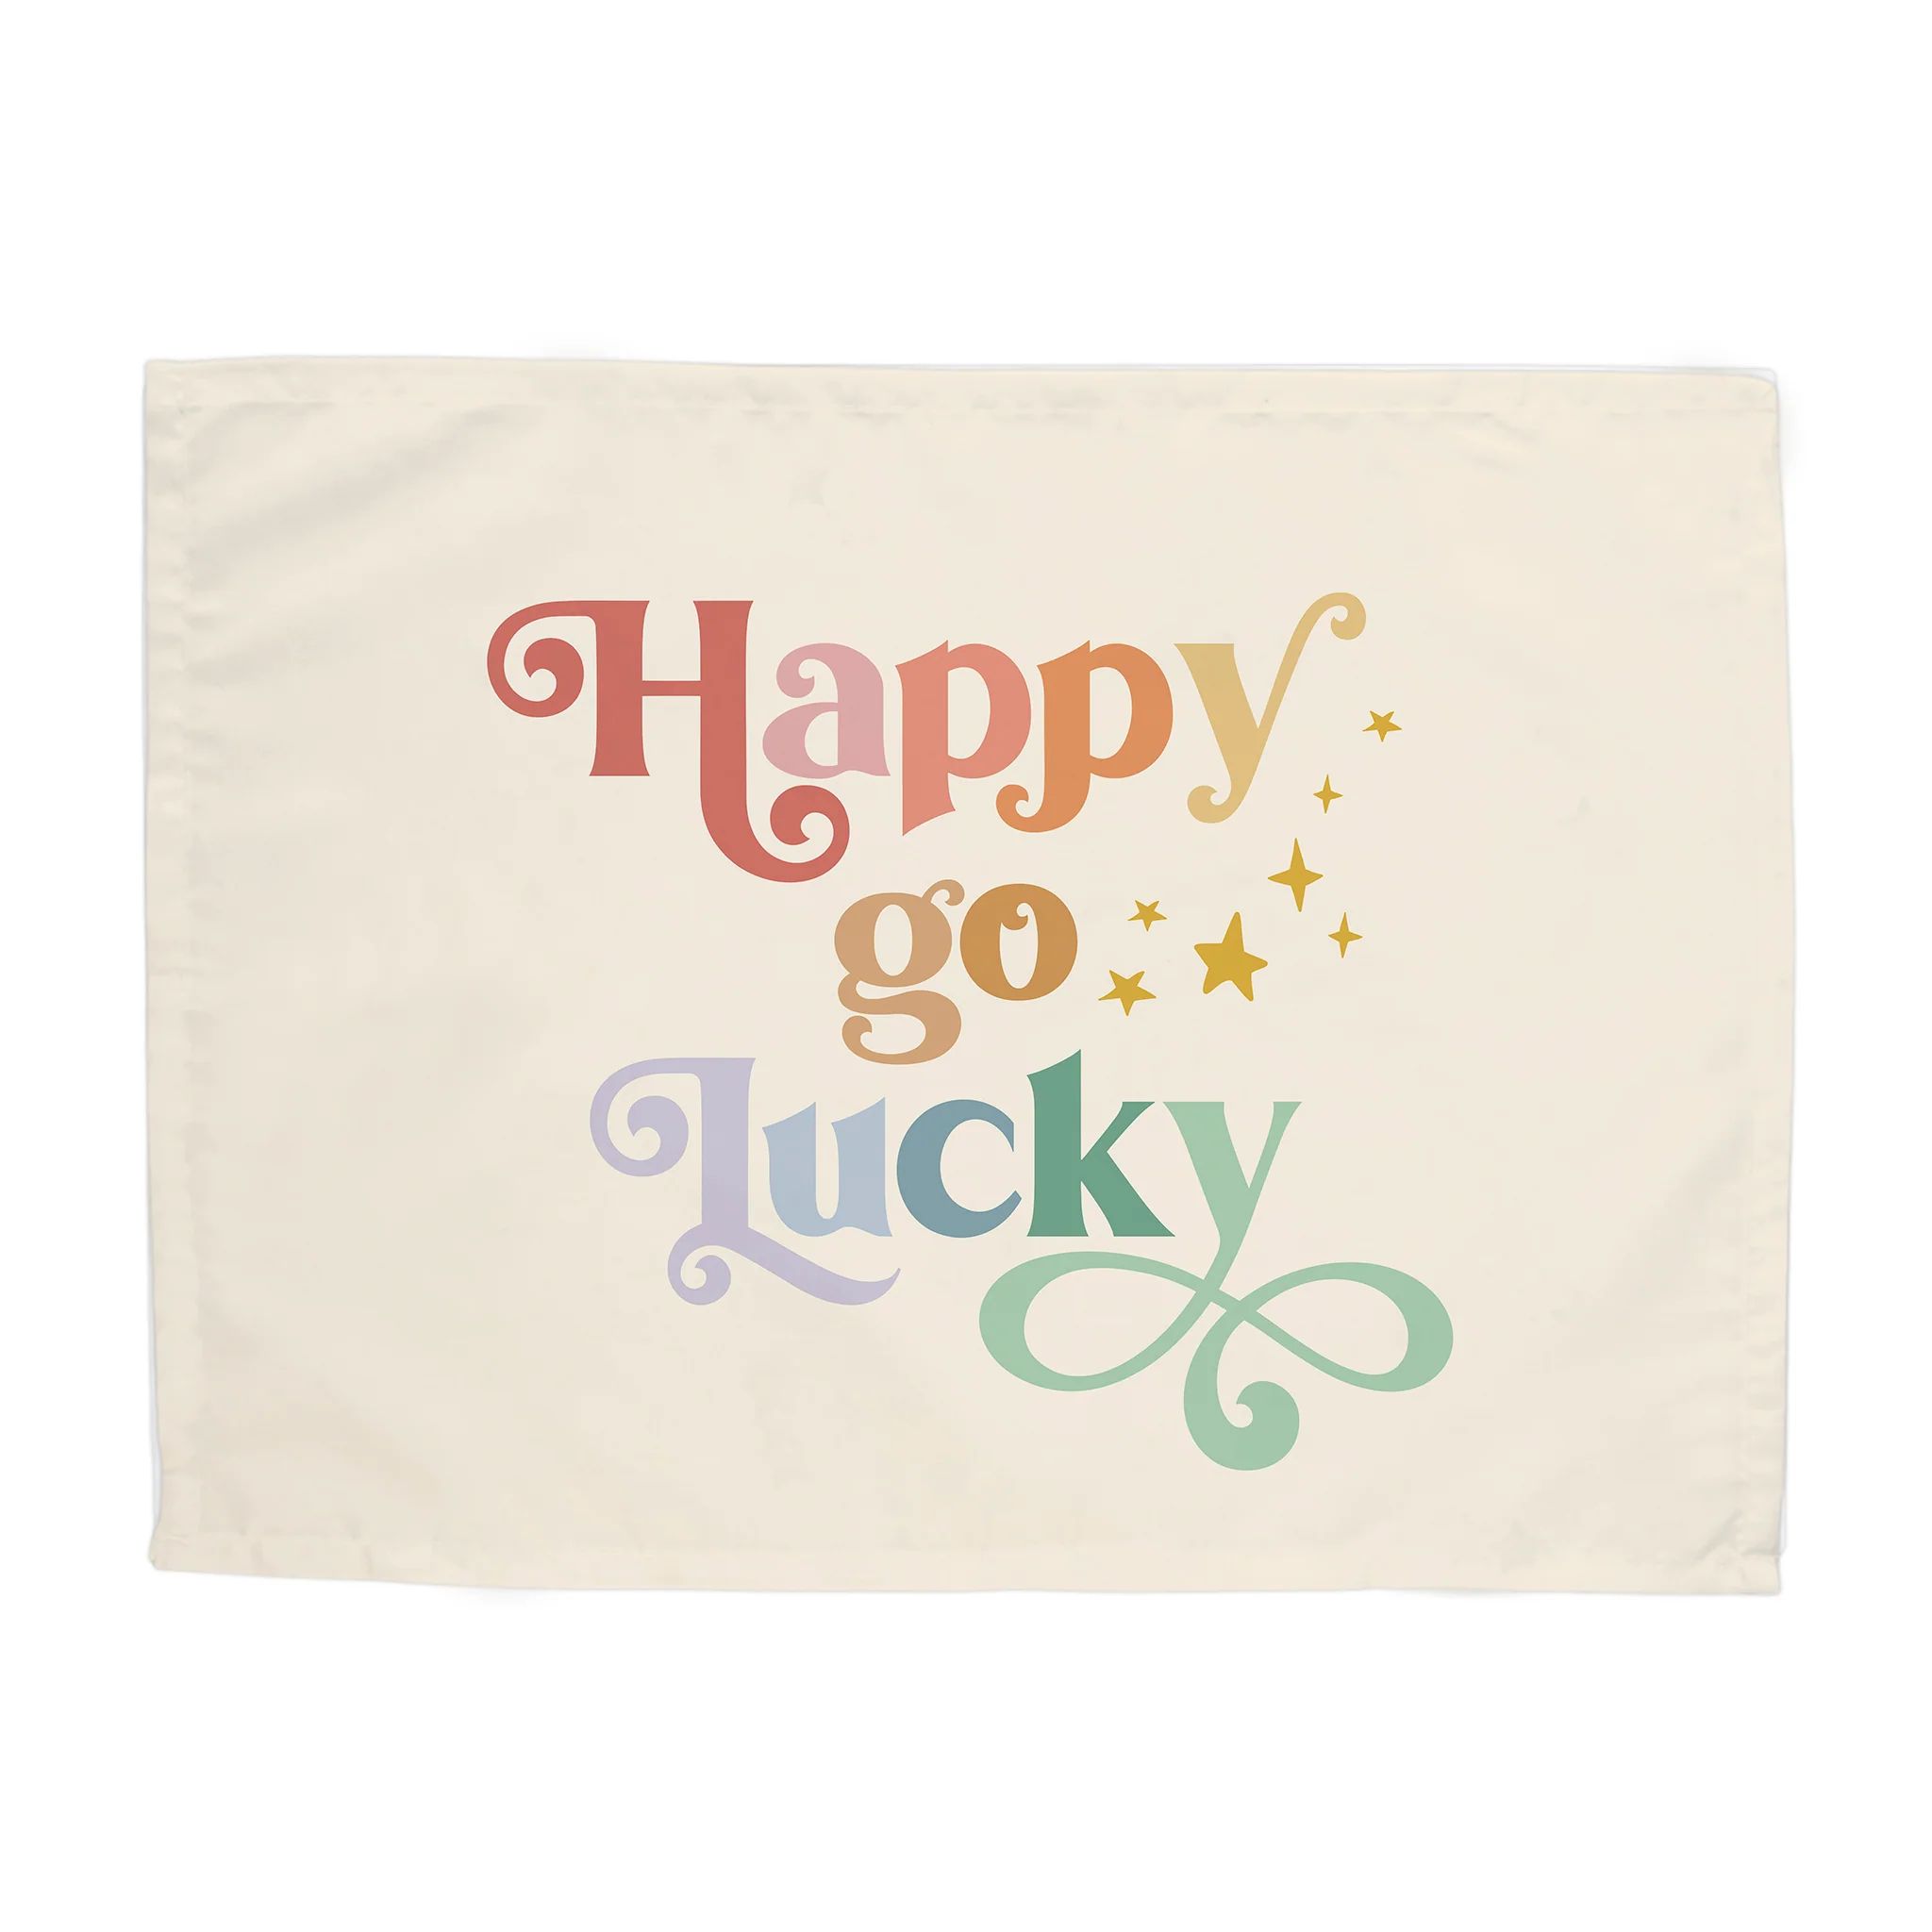 Happy Go Lucky Banner | Hunny Prints